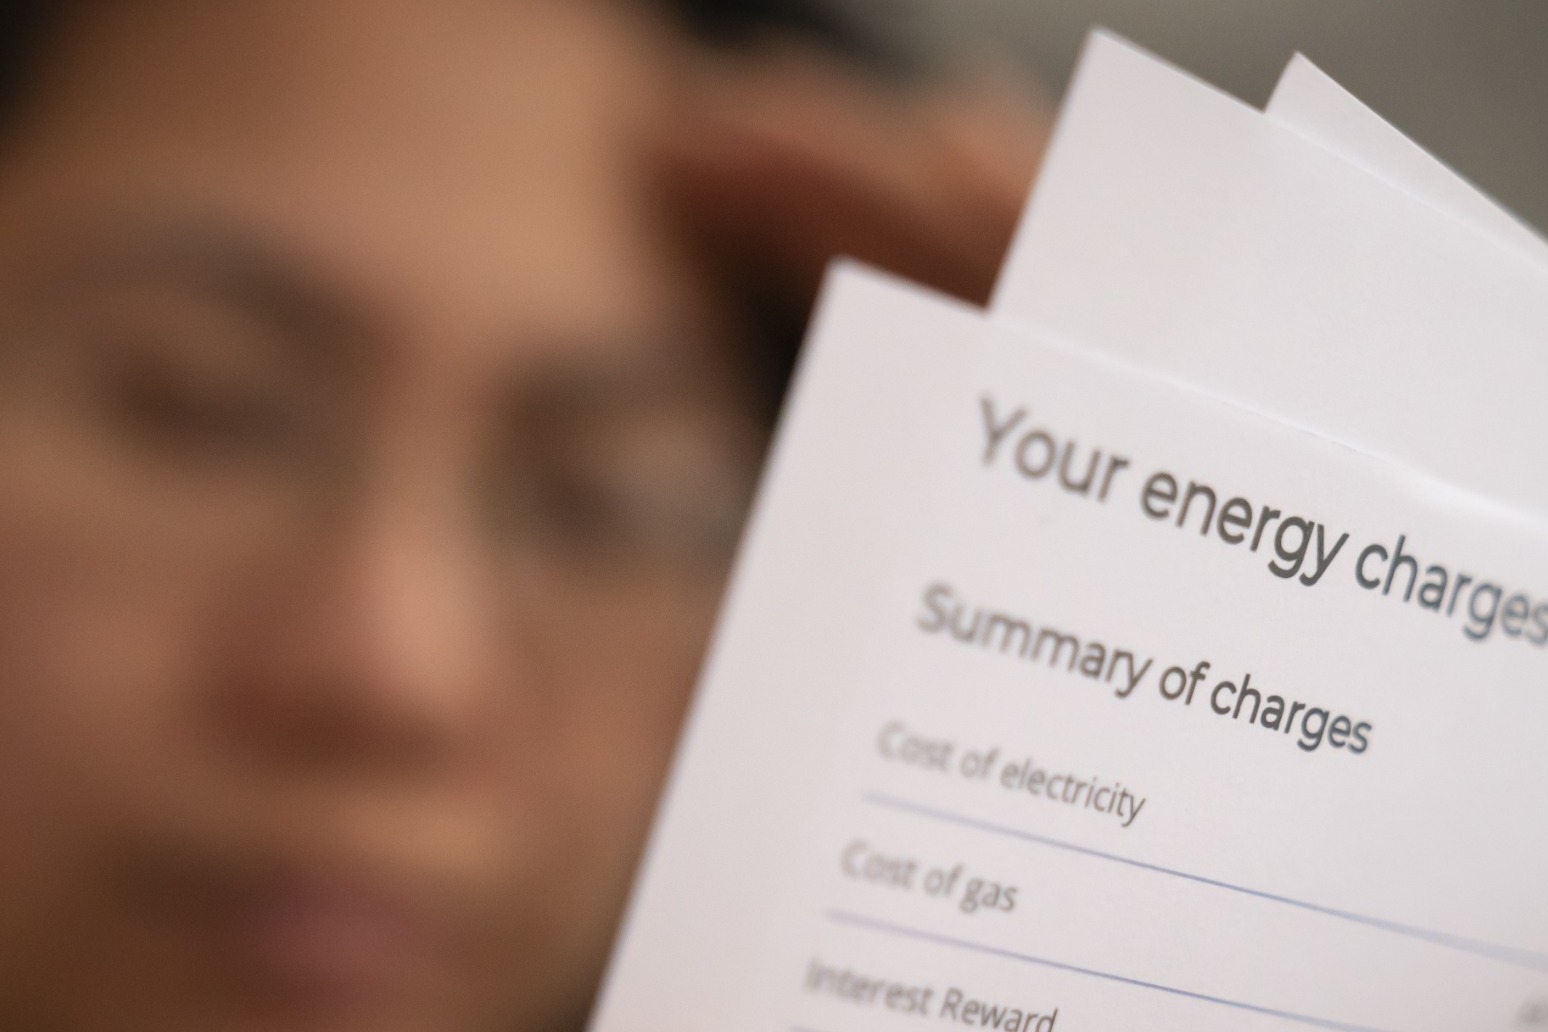 Officials warned they did not have enough time to assess energy support plans 